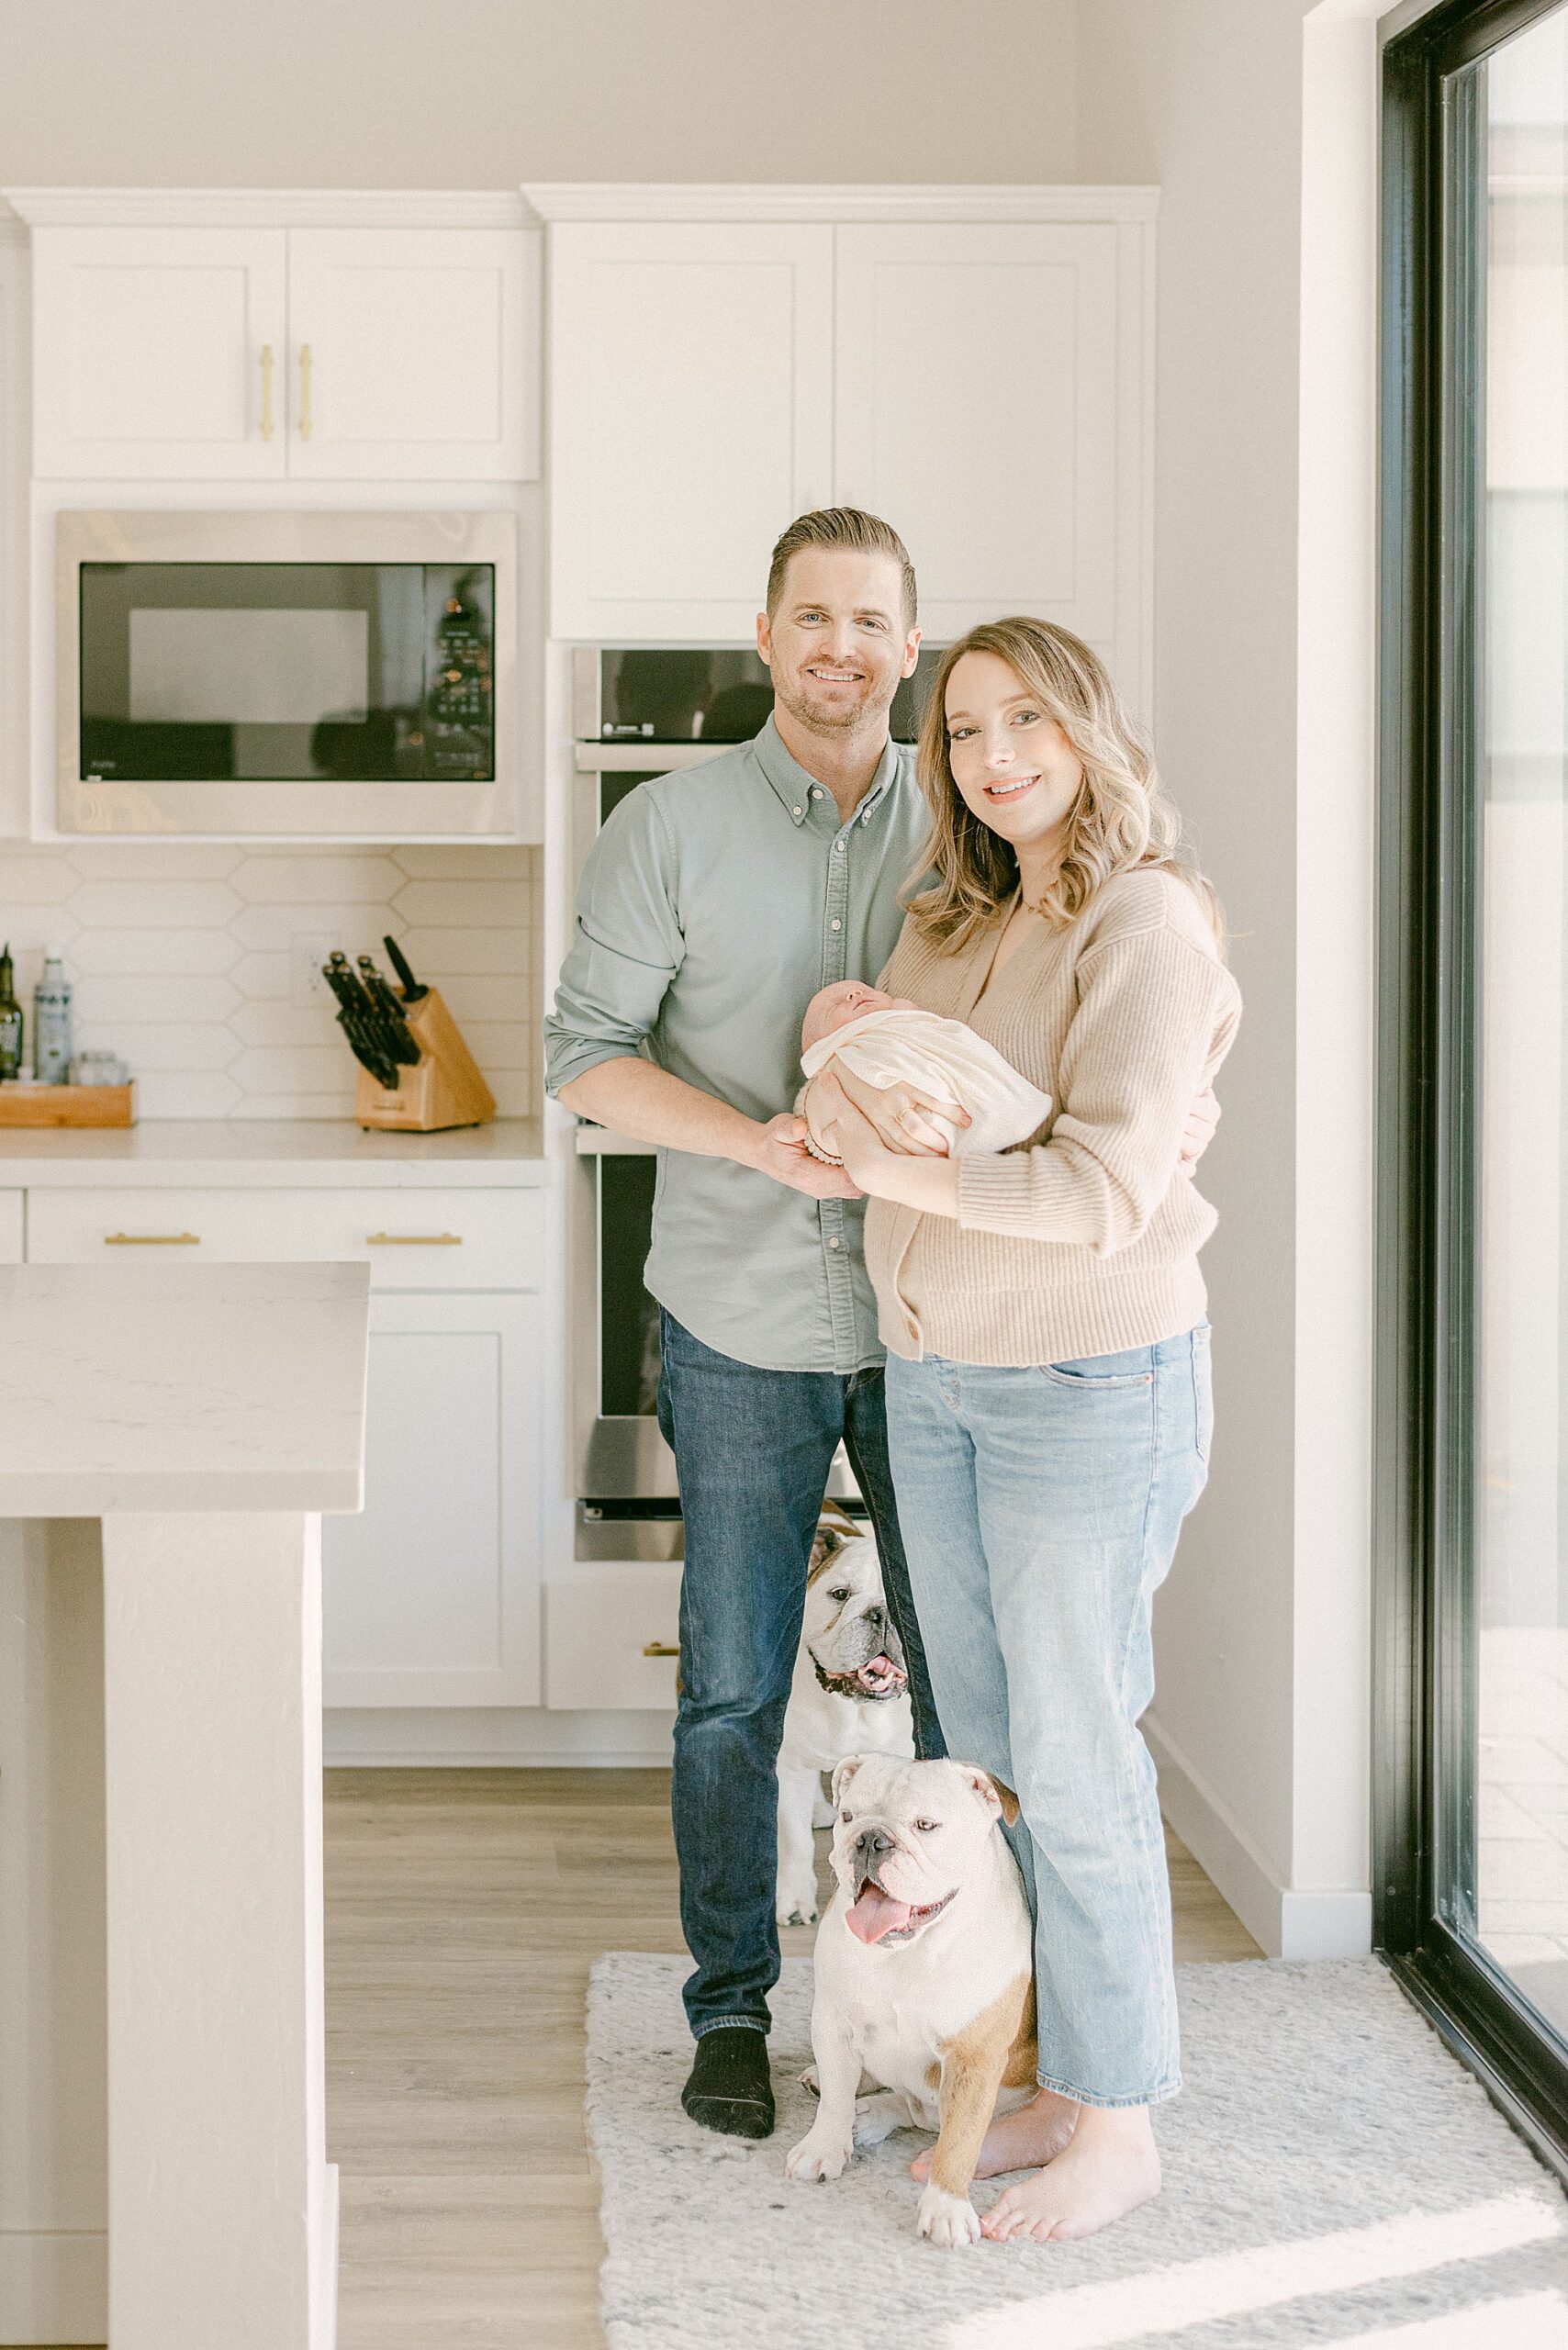 New parents standing in kitchen with baby in arms and two English Bulldogs. They were prepared on when to take newborn photos.